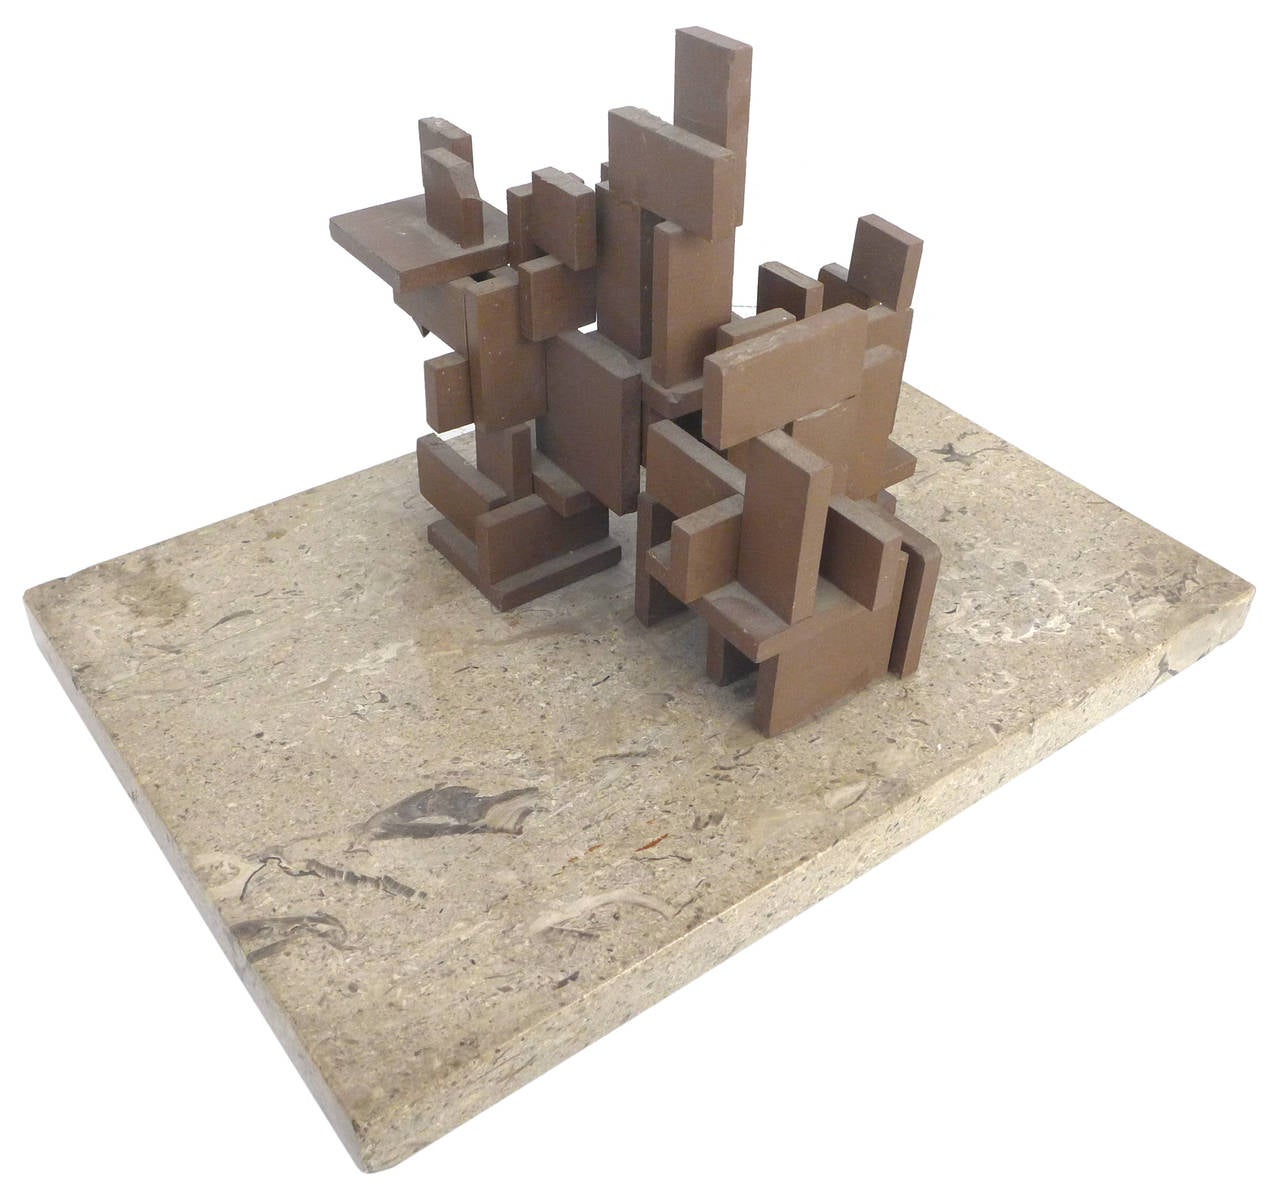 A beautifully architectural sculpture by California artist/architect Jerry L. Pollak.  An assemblage of small clay tablets of various sizes clearly erected to evince a modernist edifice.  An artful architectural-model.  Piece is affixed to its